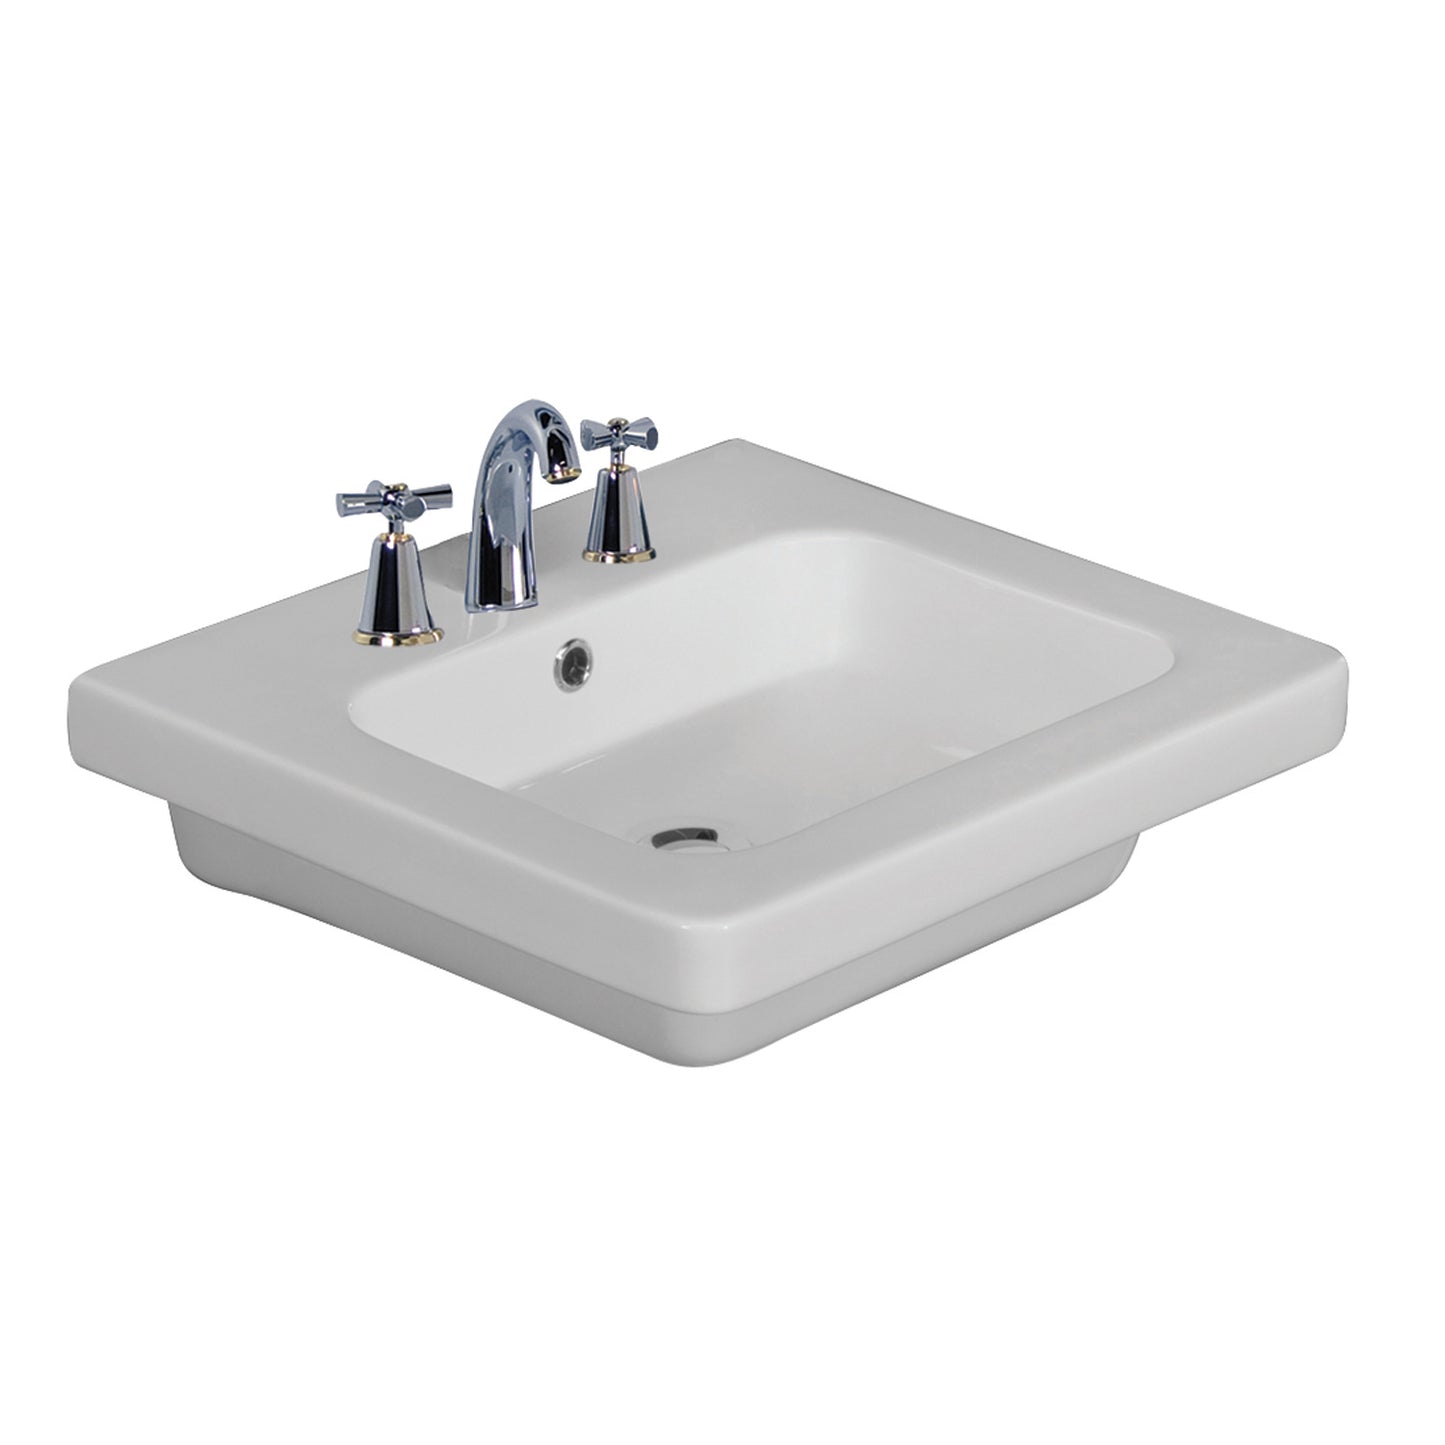 Resort 550 Wall Hung Bathroom Sink White 8" Widespread Faucet